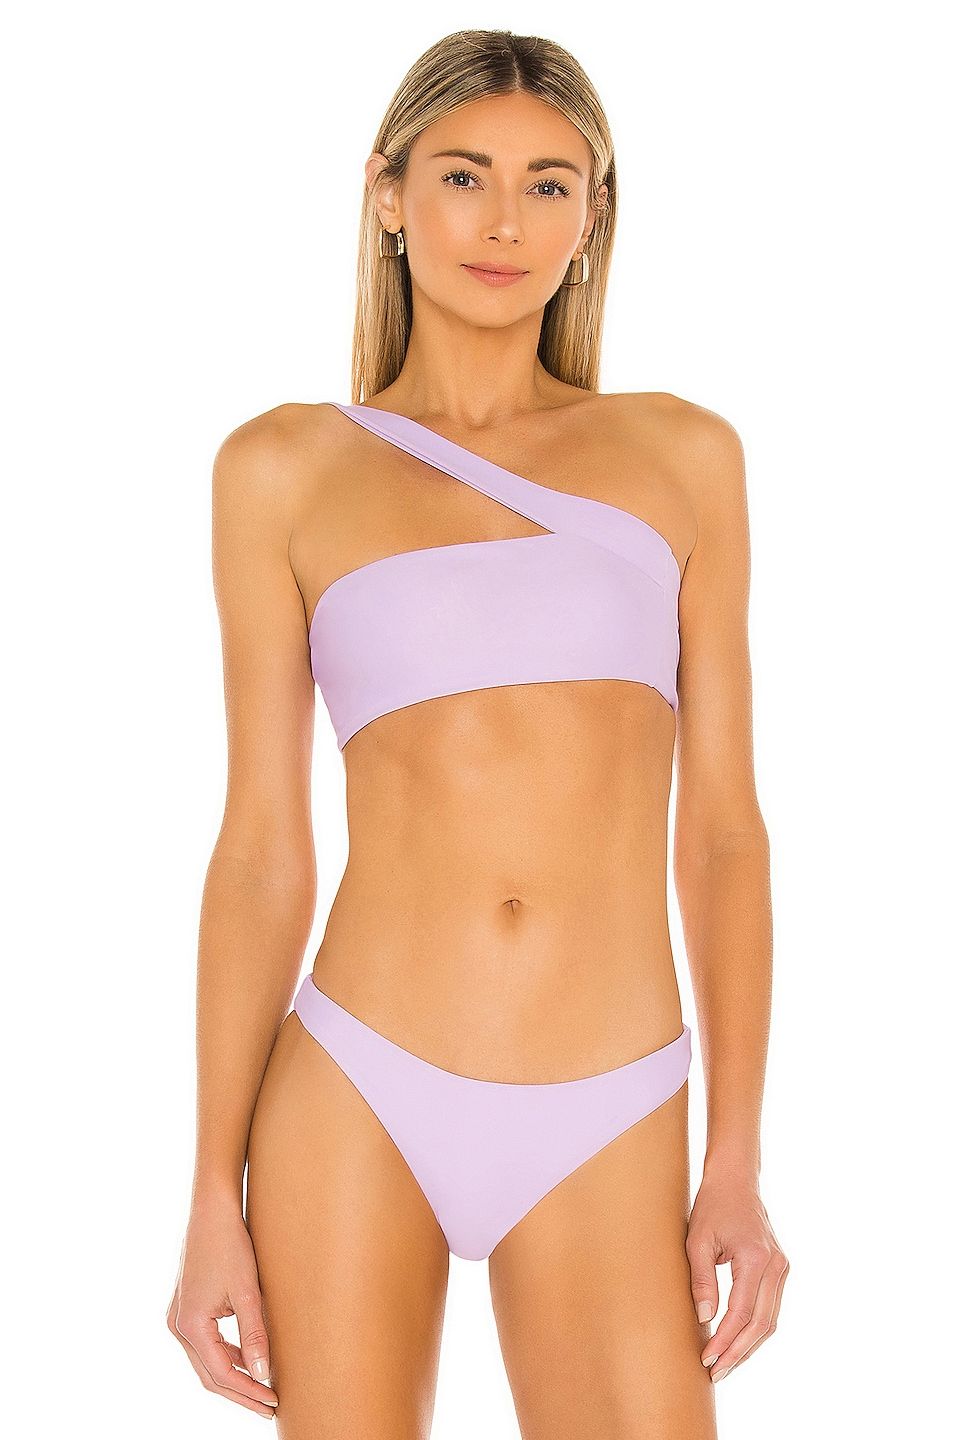 Small Boobs? These Swimsuits Are Perfect For You